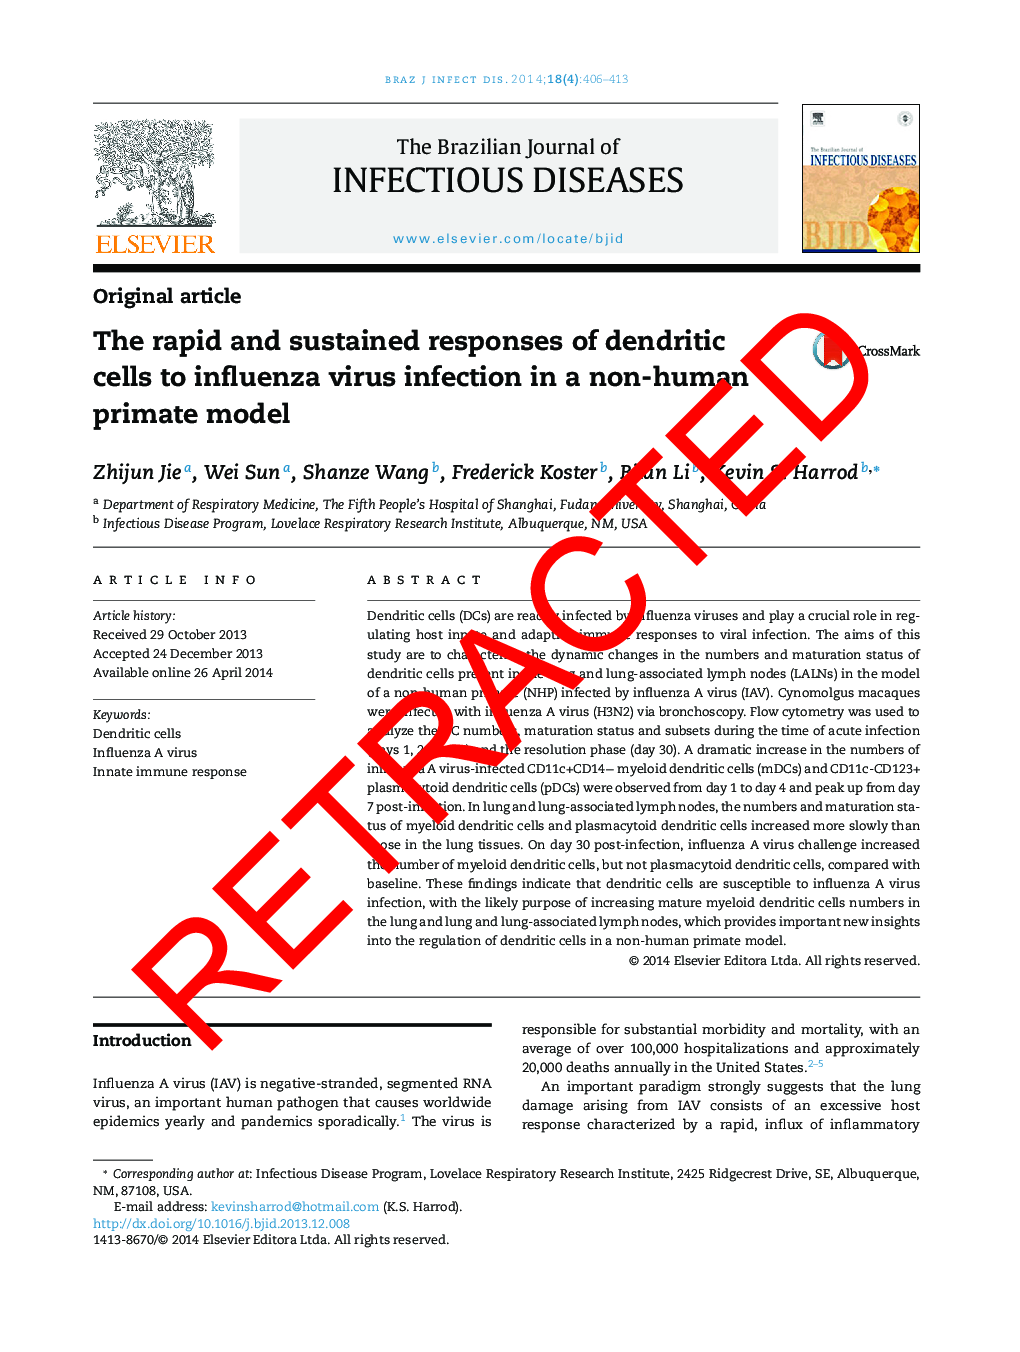 RETRACTED: The rapid and sustained responses of dendritic cells to influenza virus infection in a non-human primate model